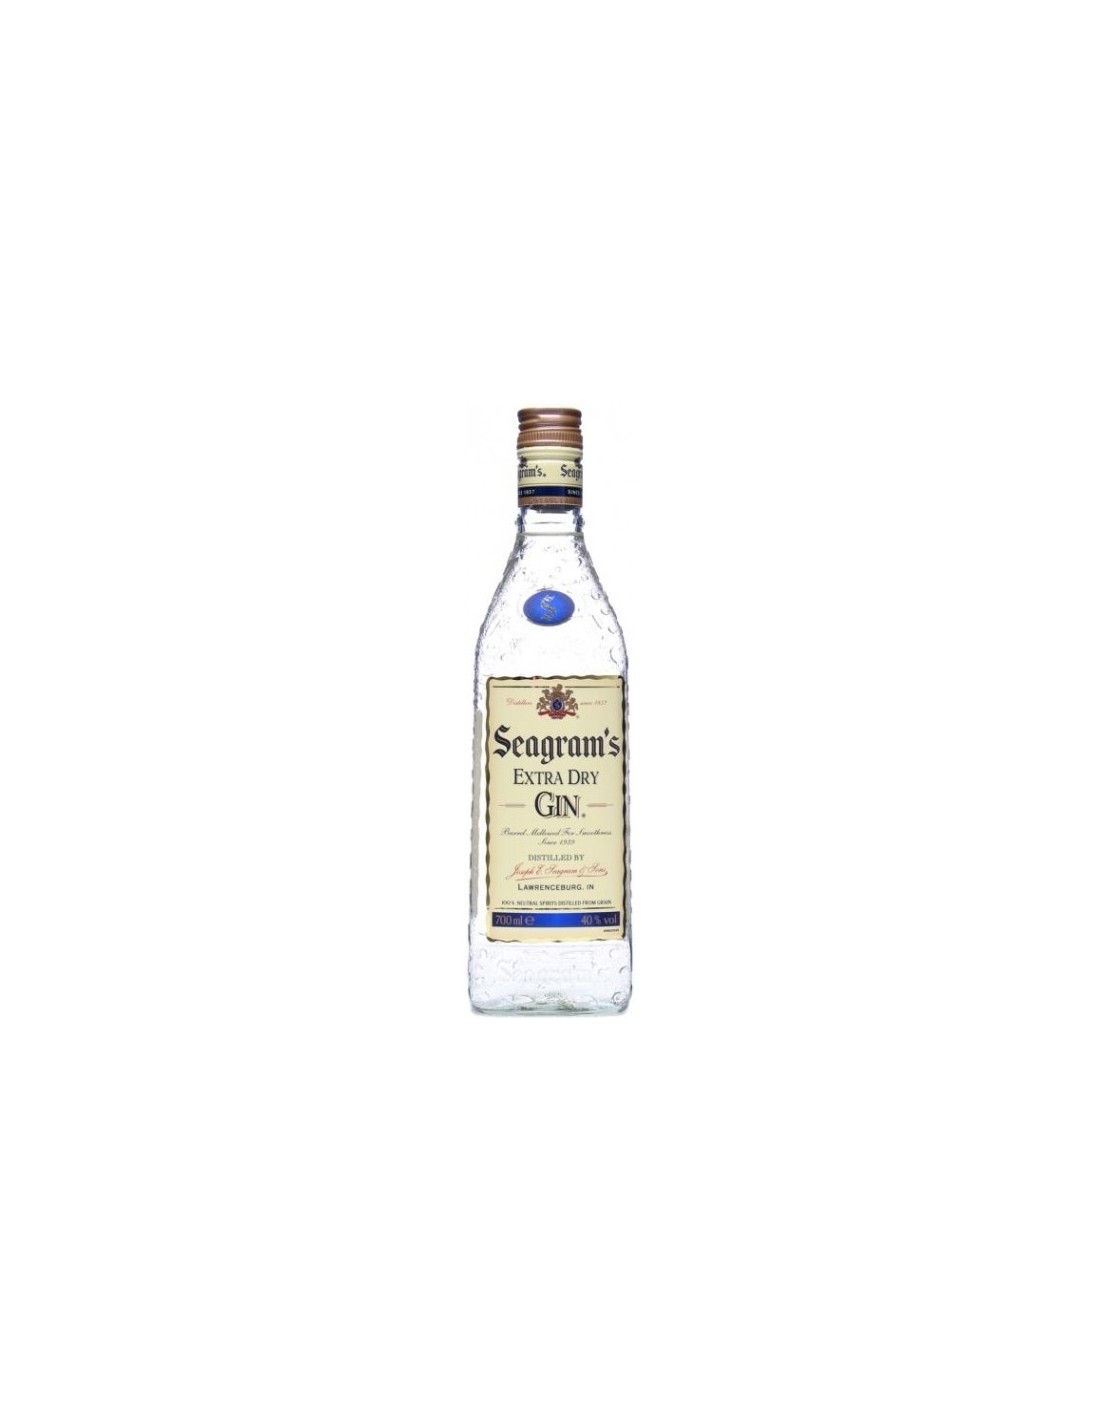 Gin Seagrams Extra Dry, 40% alc., 0.7L